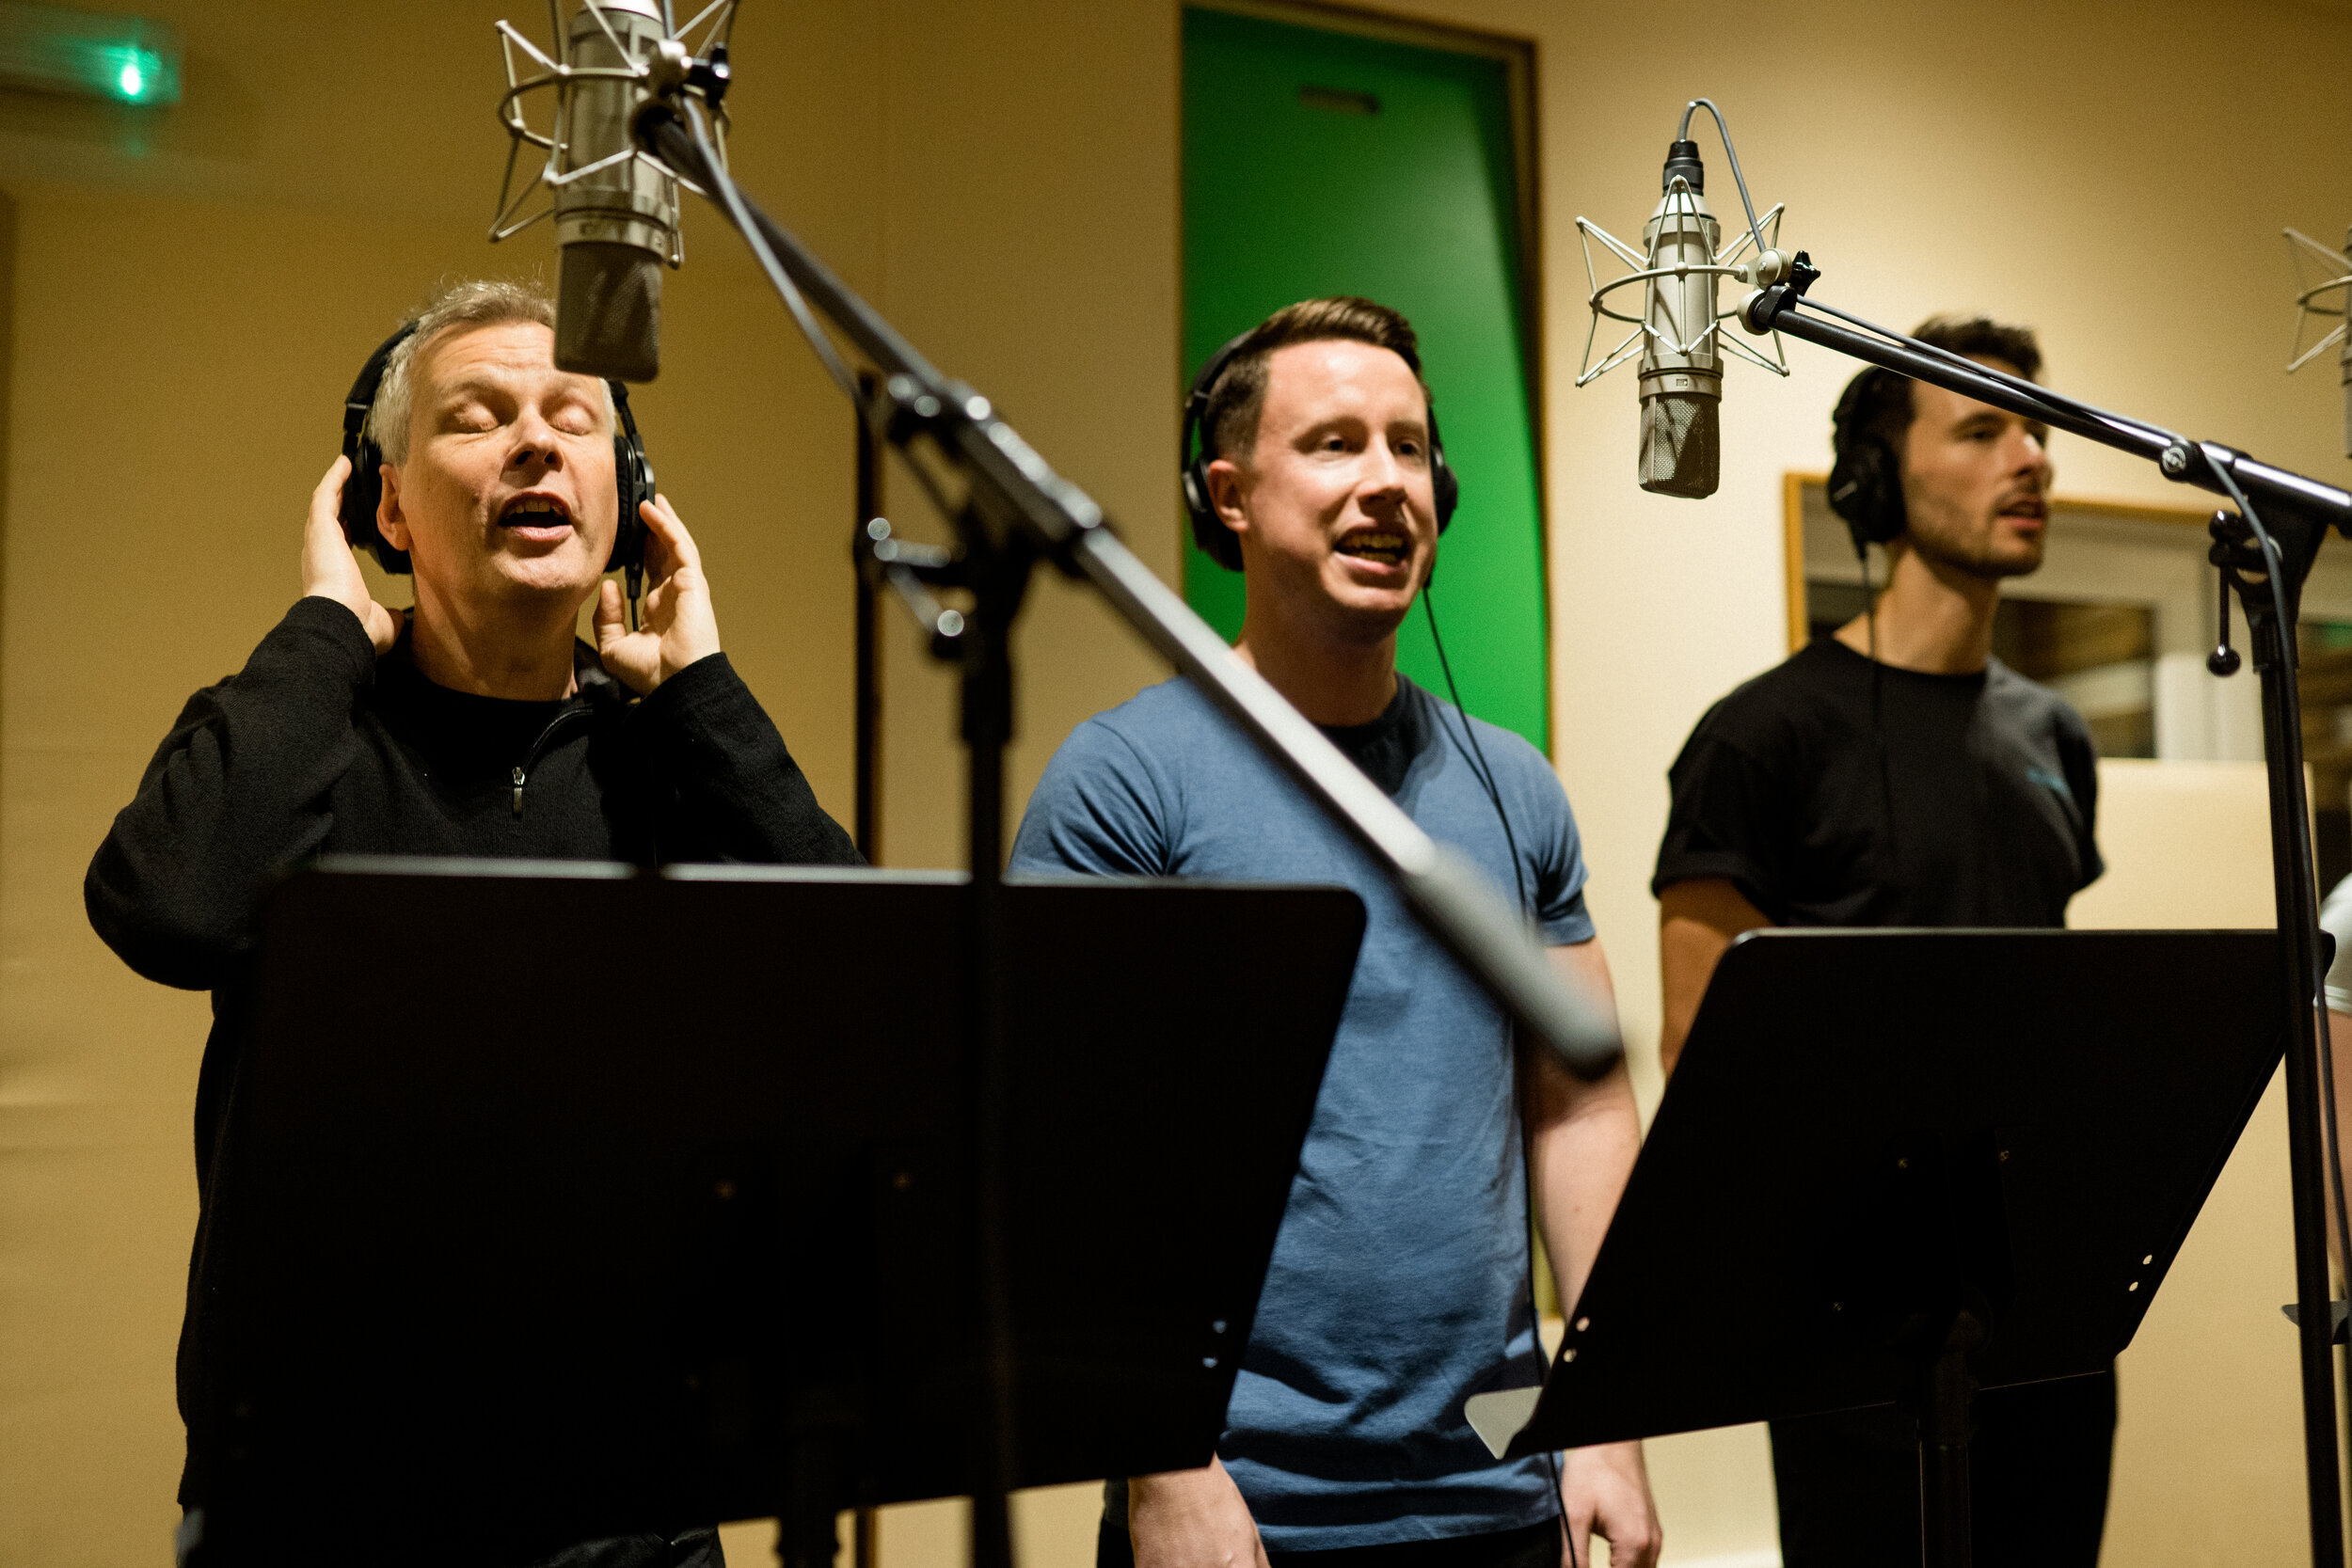 Male choir members in London record with Starling Arts. Photo by Florence Fox